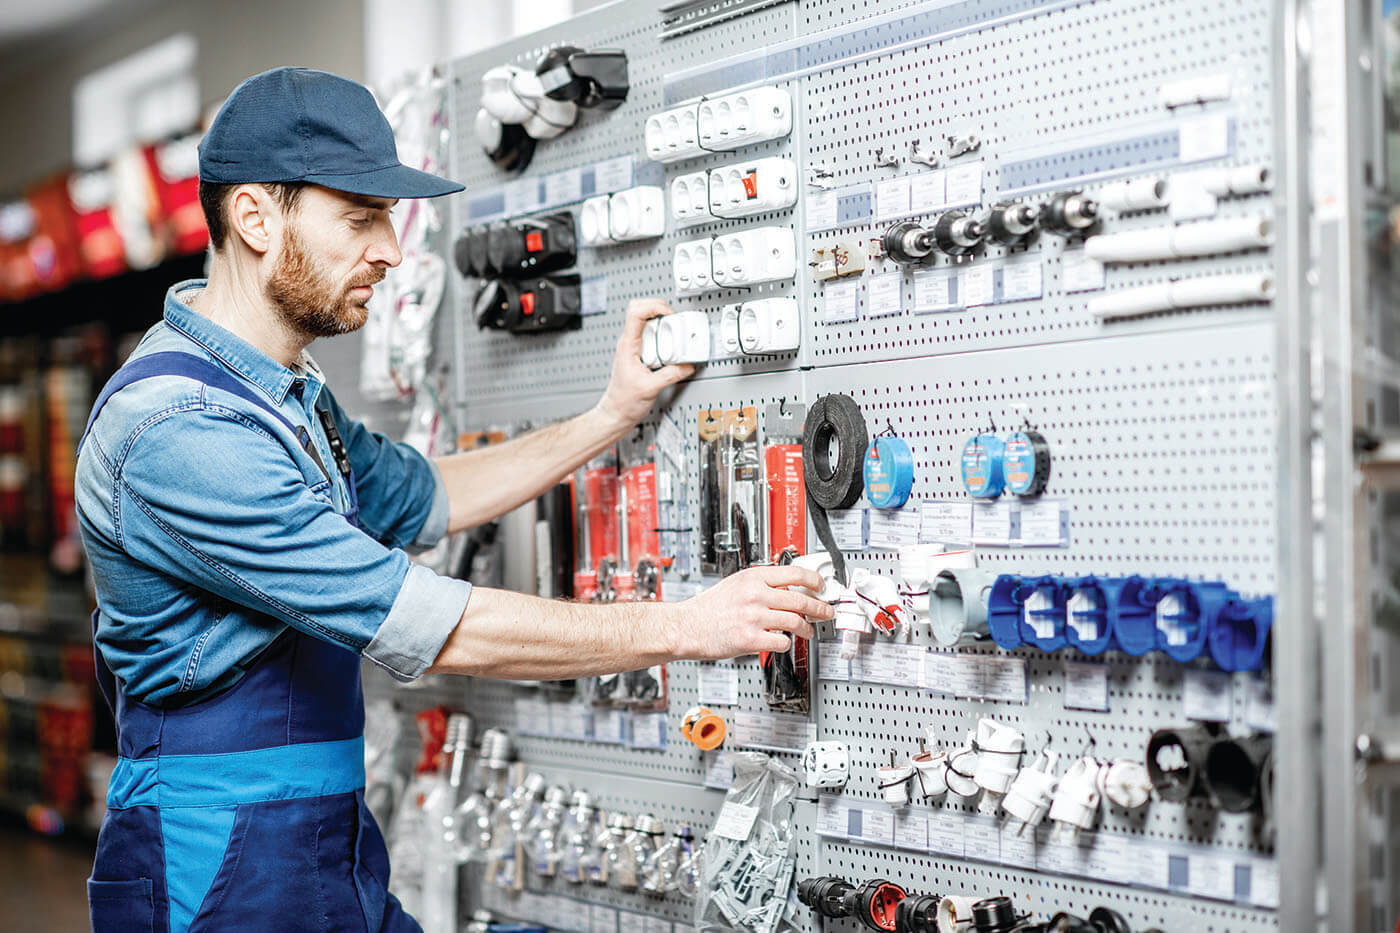 Electrician choosing electrical goods in the shop